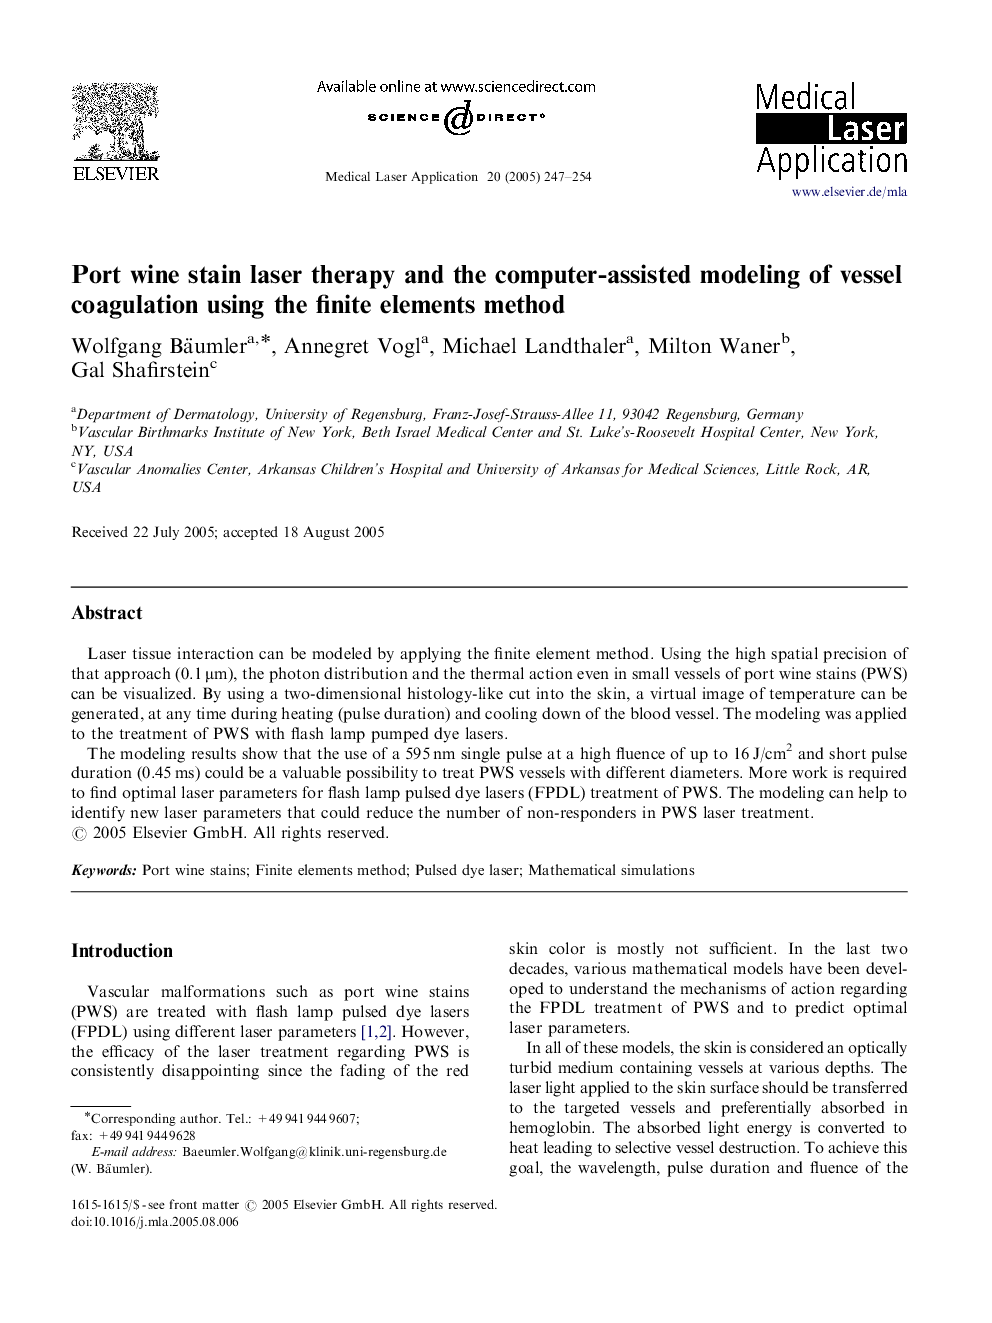 Port wine stain laser therapy and the computer-assisted modeling of vessel coagulation using the finite elements method